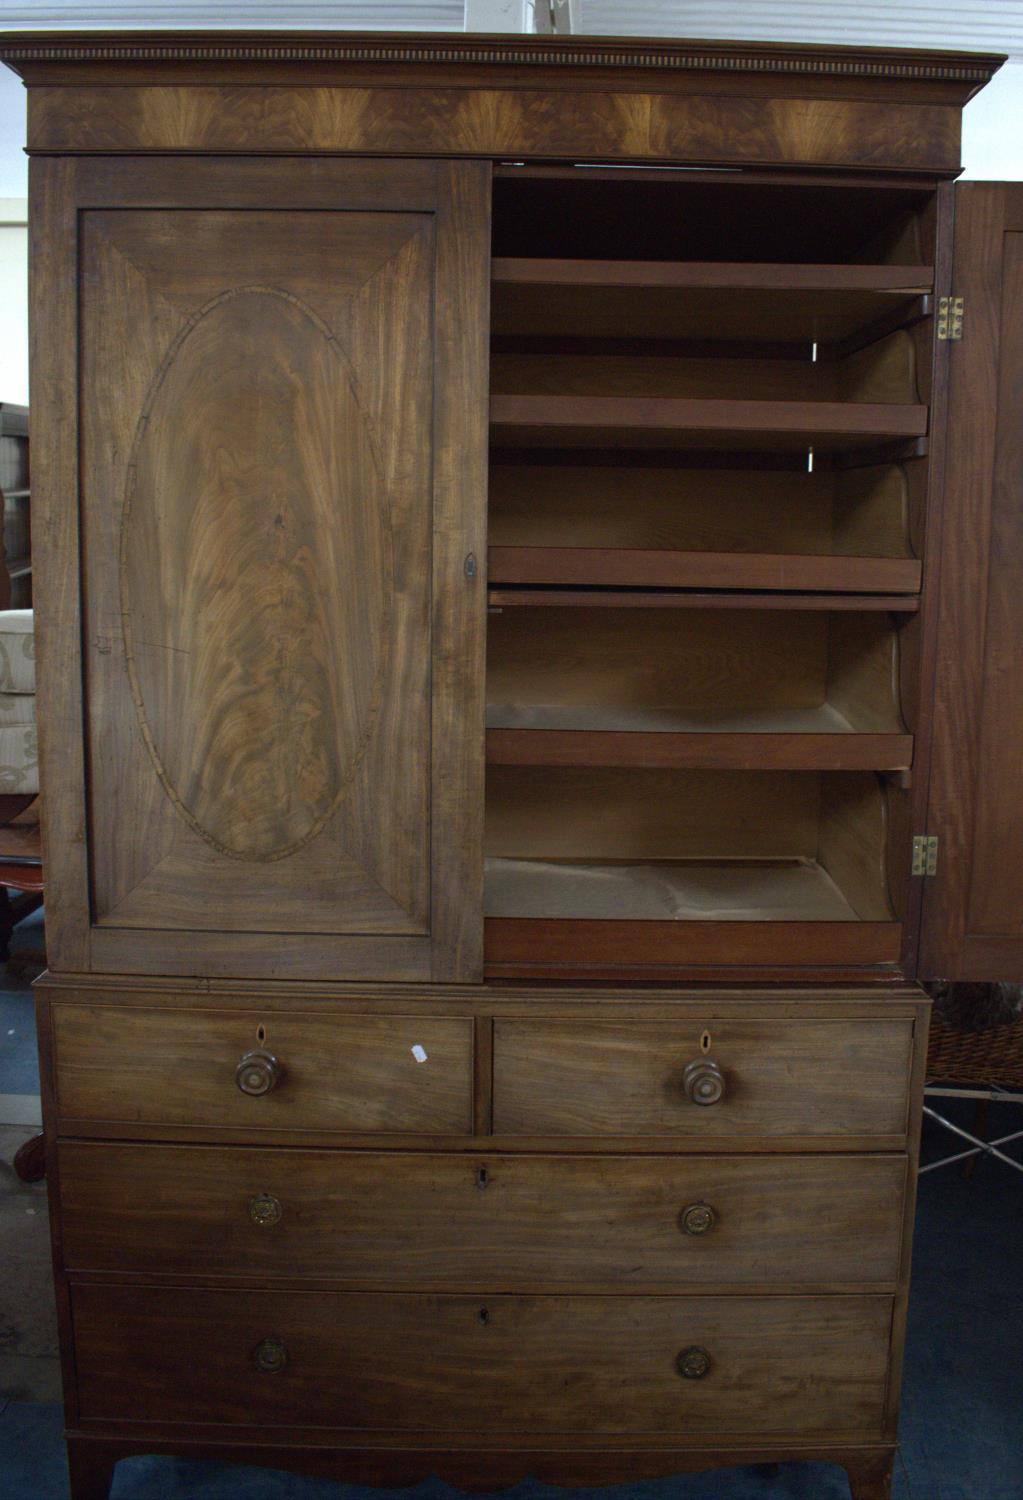 A Mid 19th Century Inlaid Linen Press, the Base with Two Short and Two Long Drawers on Bracket Feet, - Image 2 of 2